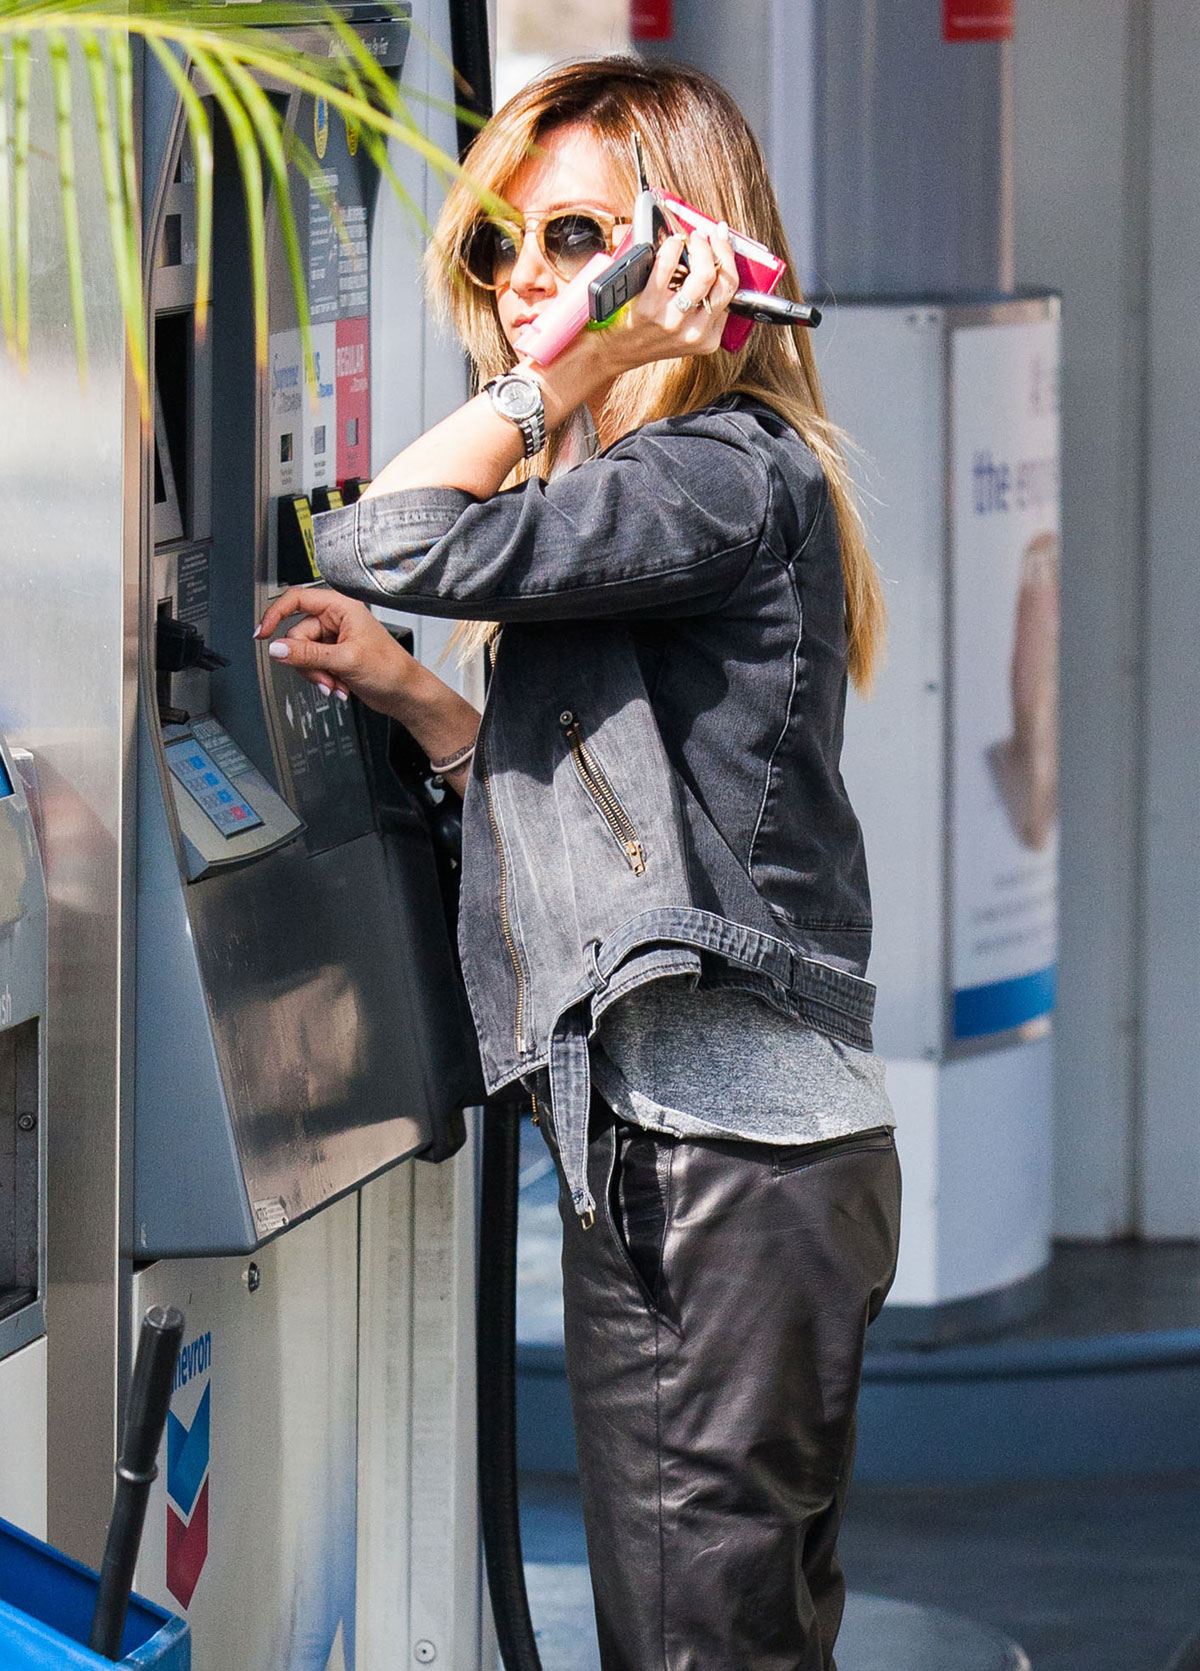 Ashley Tisdale checks out her iPhone as she runs errands around